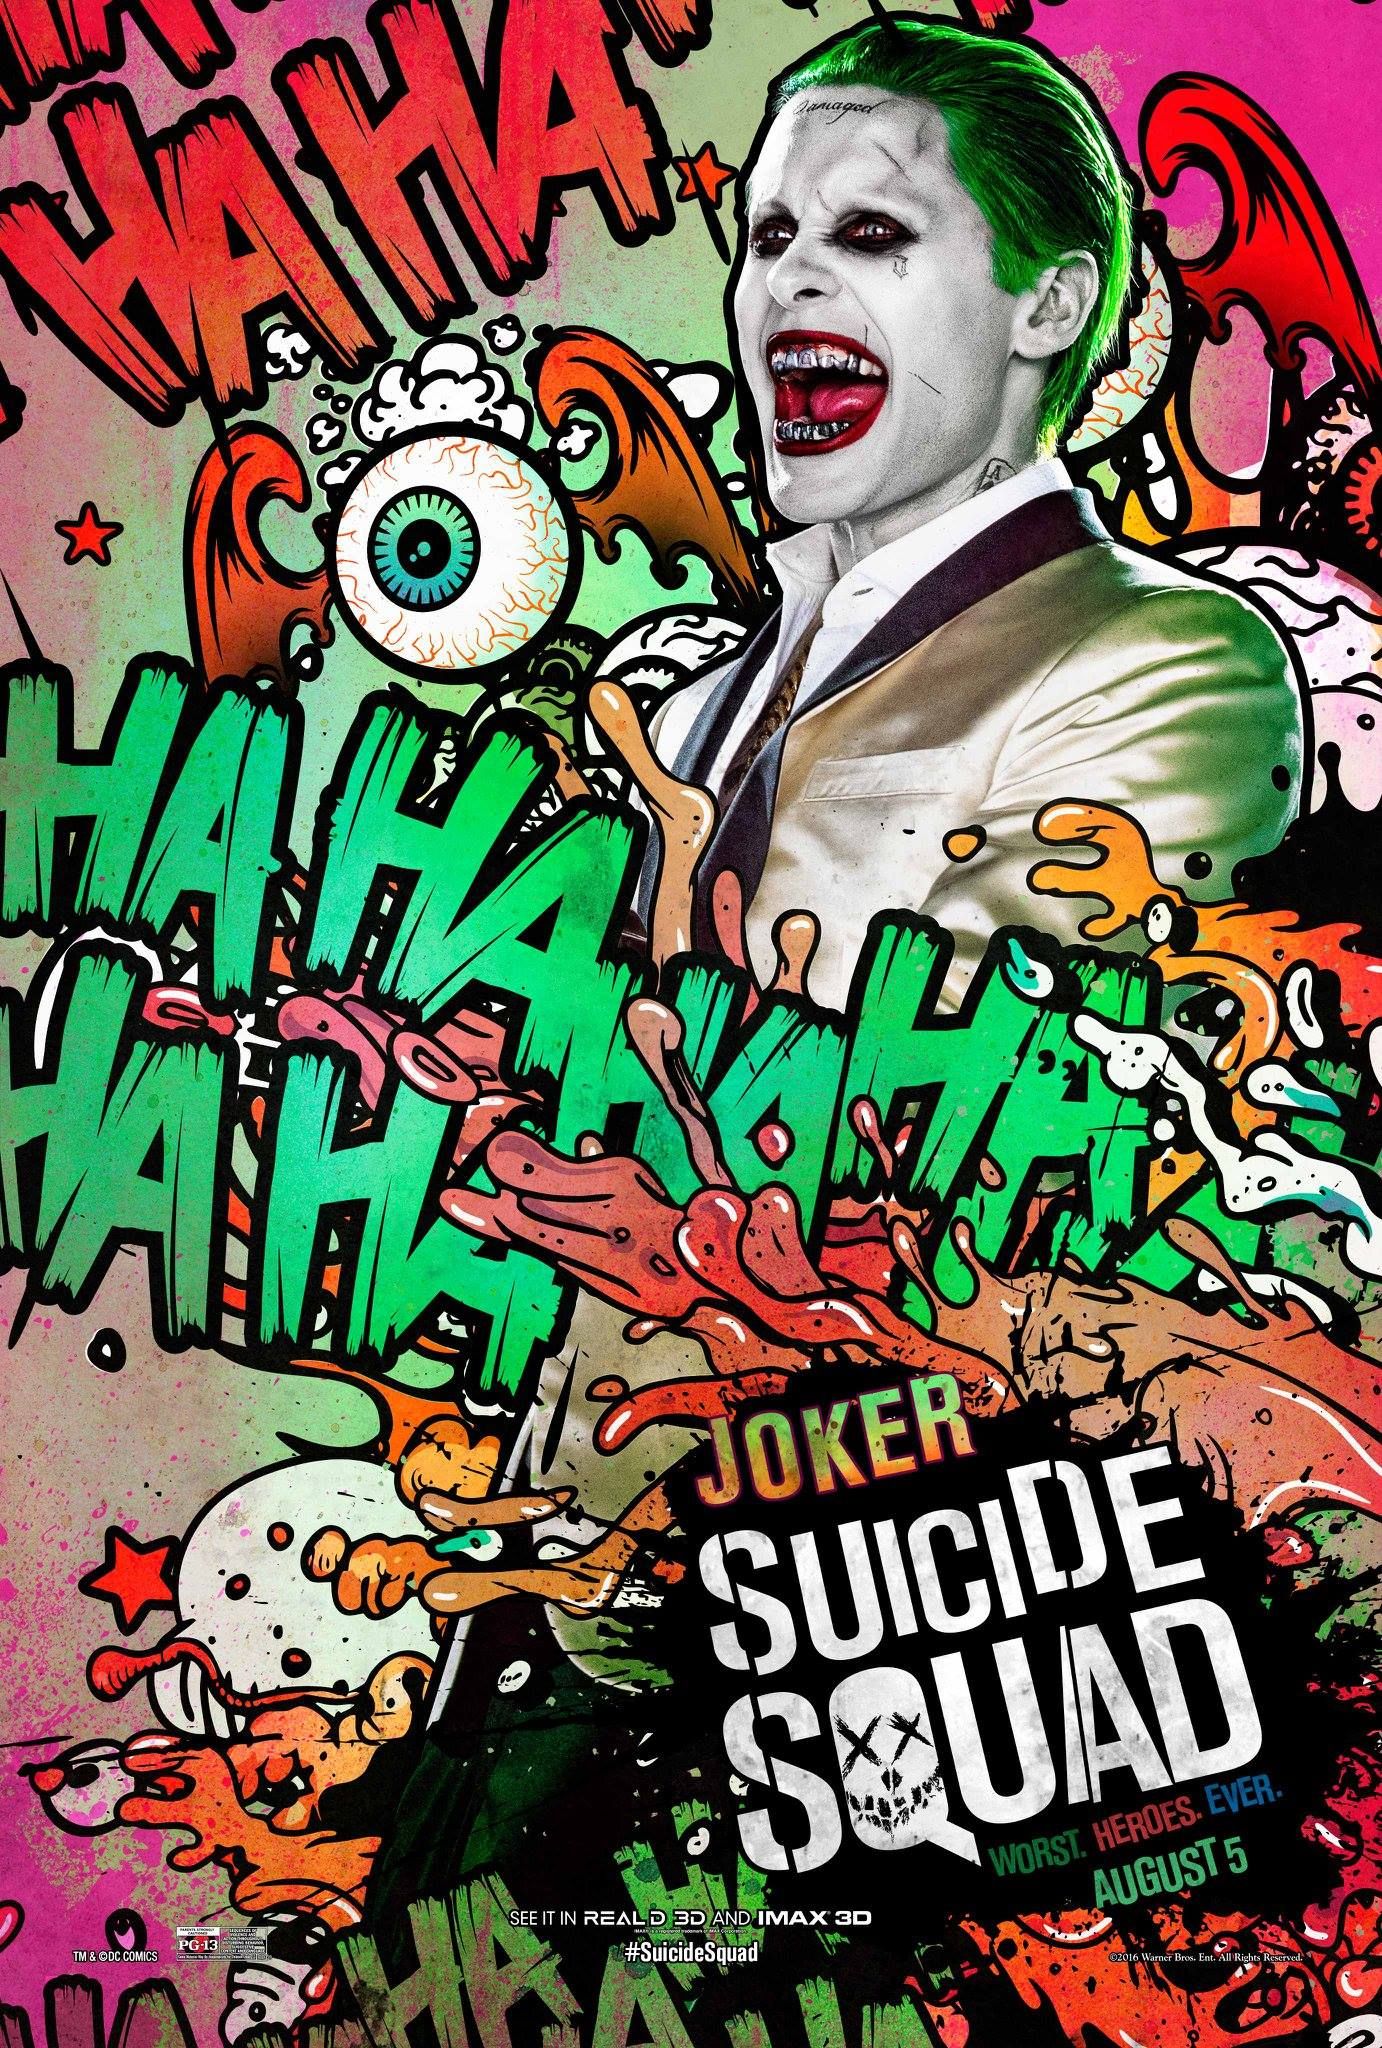 Suicide Squad: New Character Posters Are Just Plain Bad | Collider